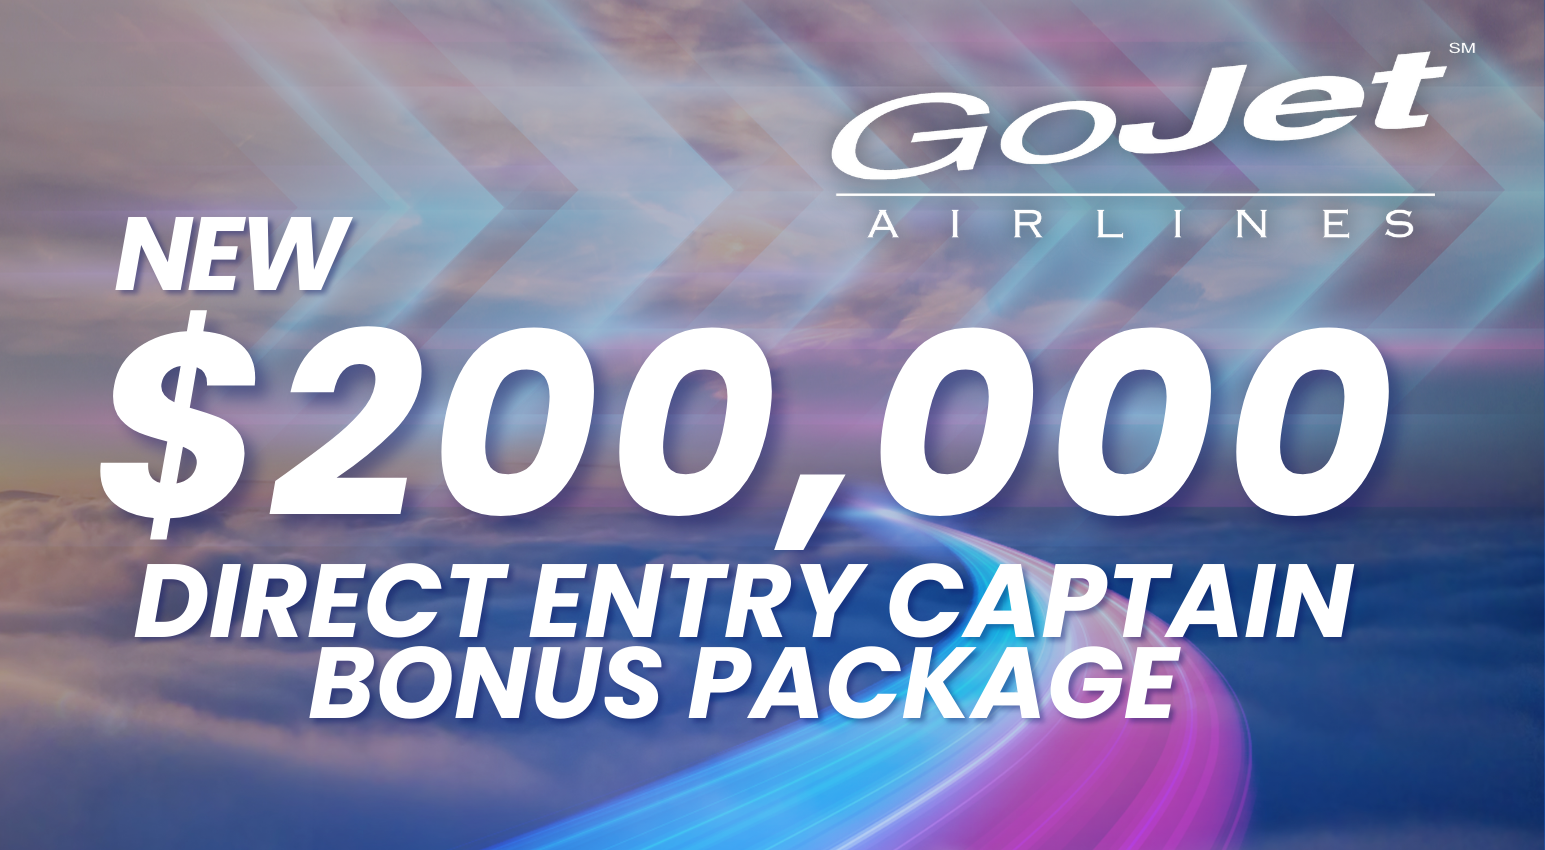 Direct Entry Captains now Earn up to $200,000 in total bonuses at GoJet!